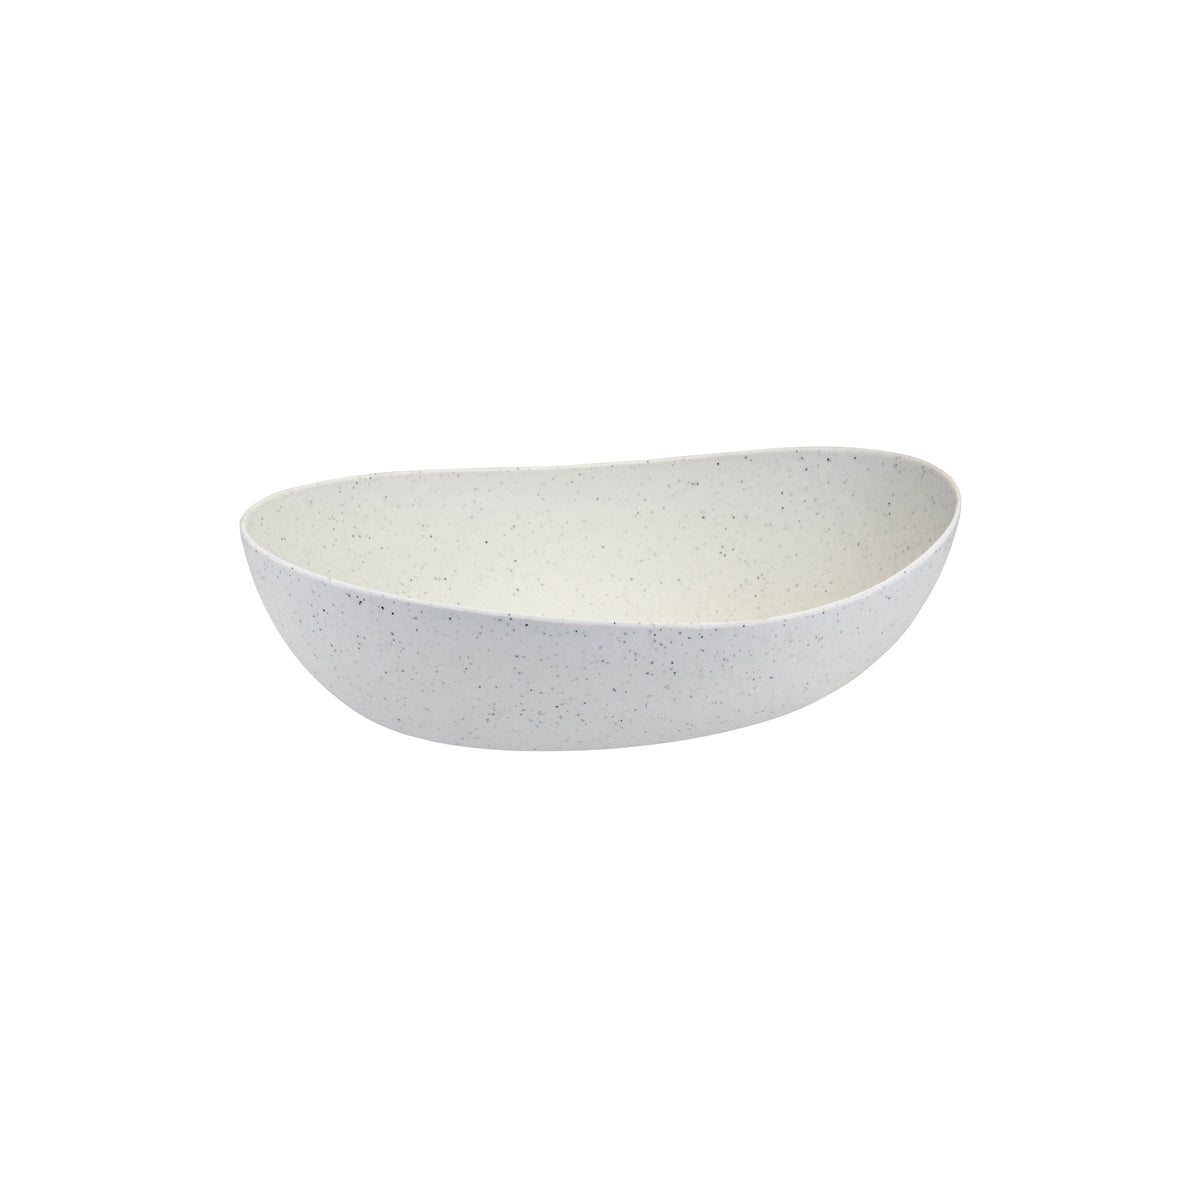 EMERGE BOWL - 348x270mm, STONE NATURAL: Pack of 1